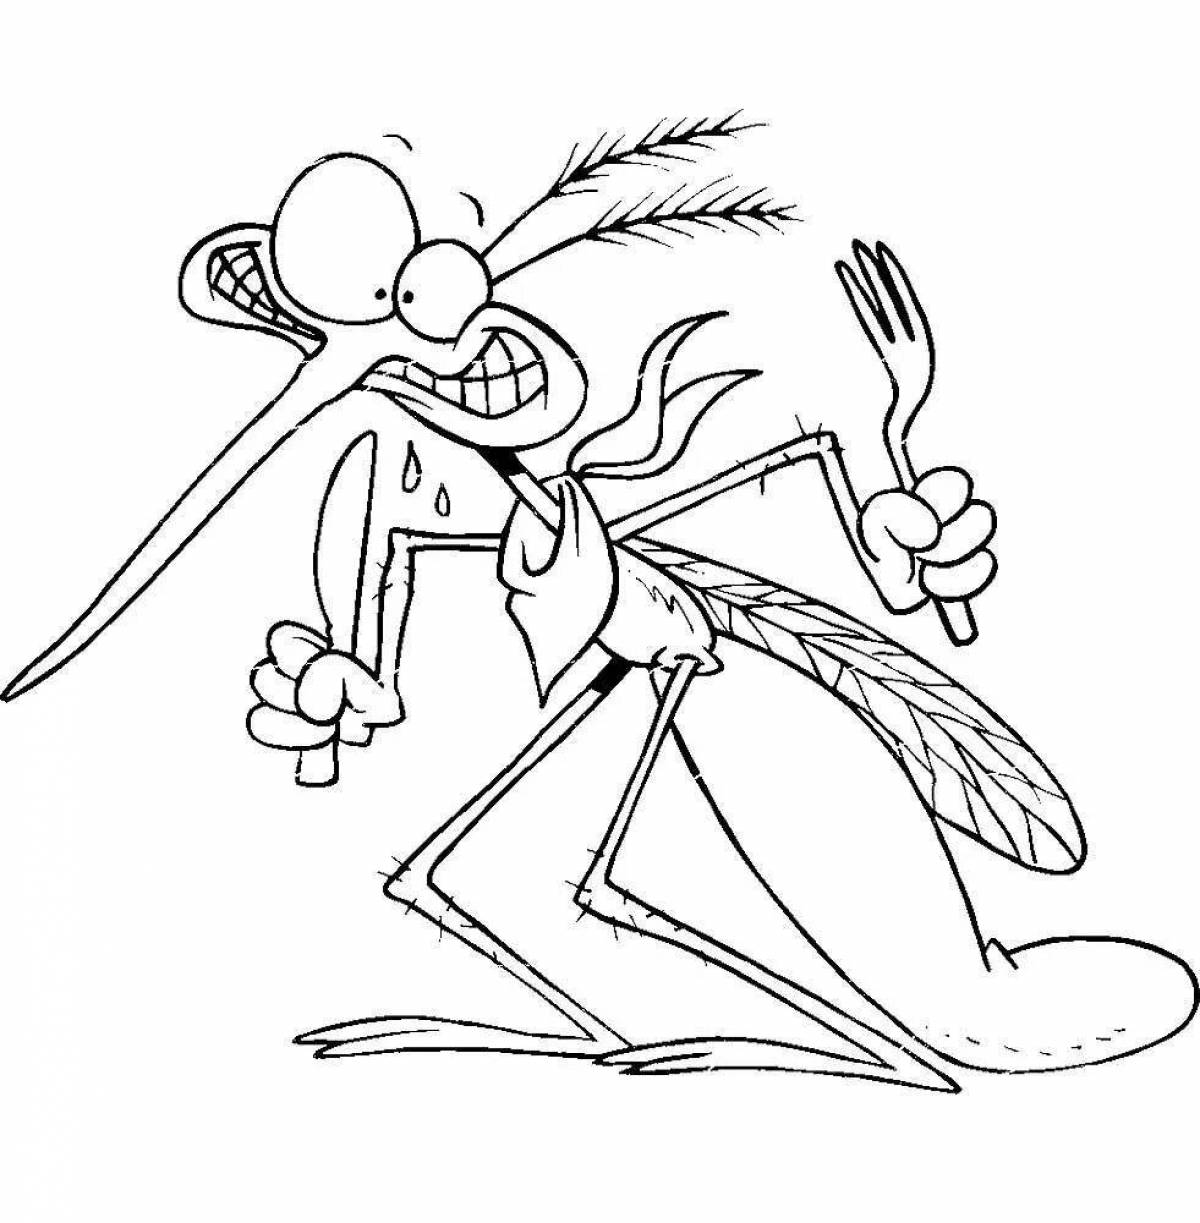 Attractive mosquito coloring page